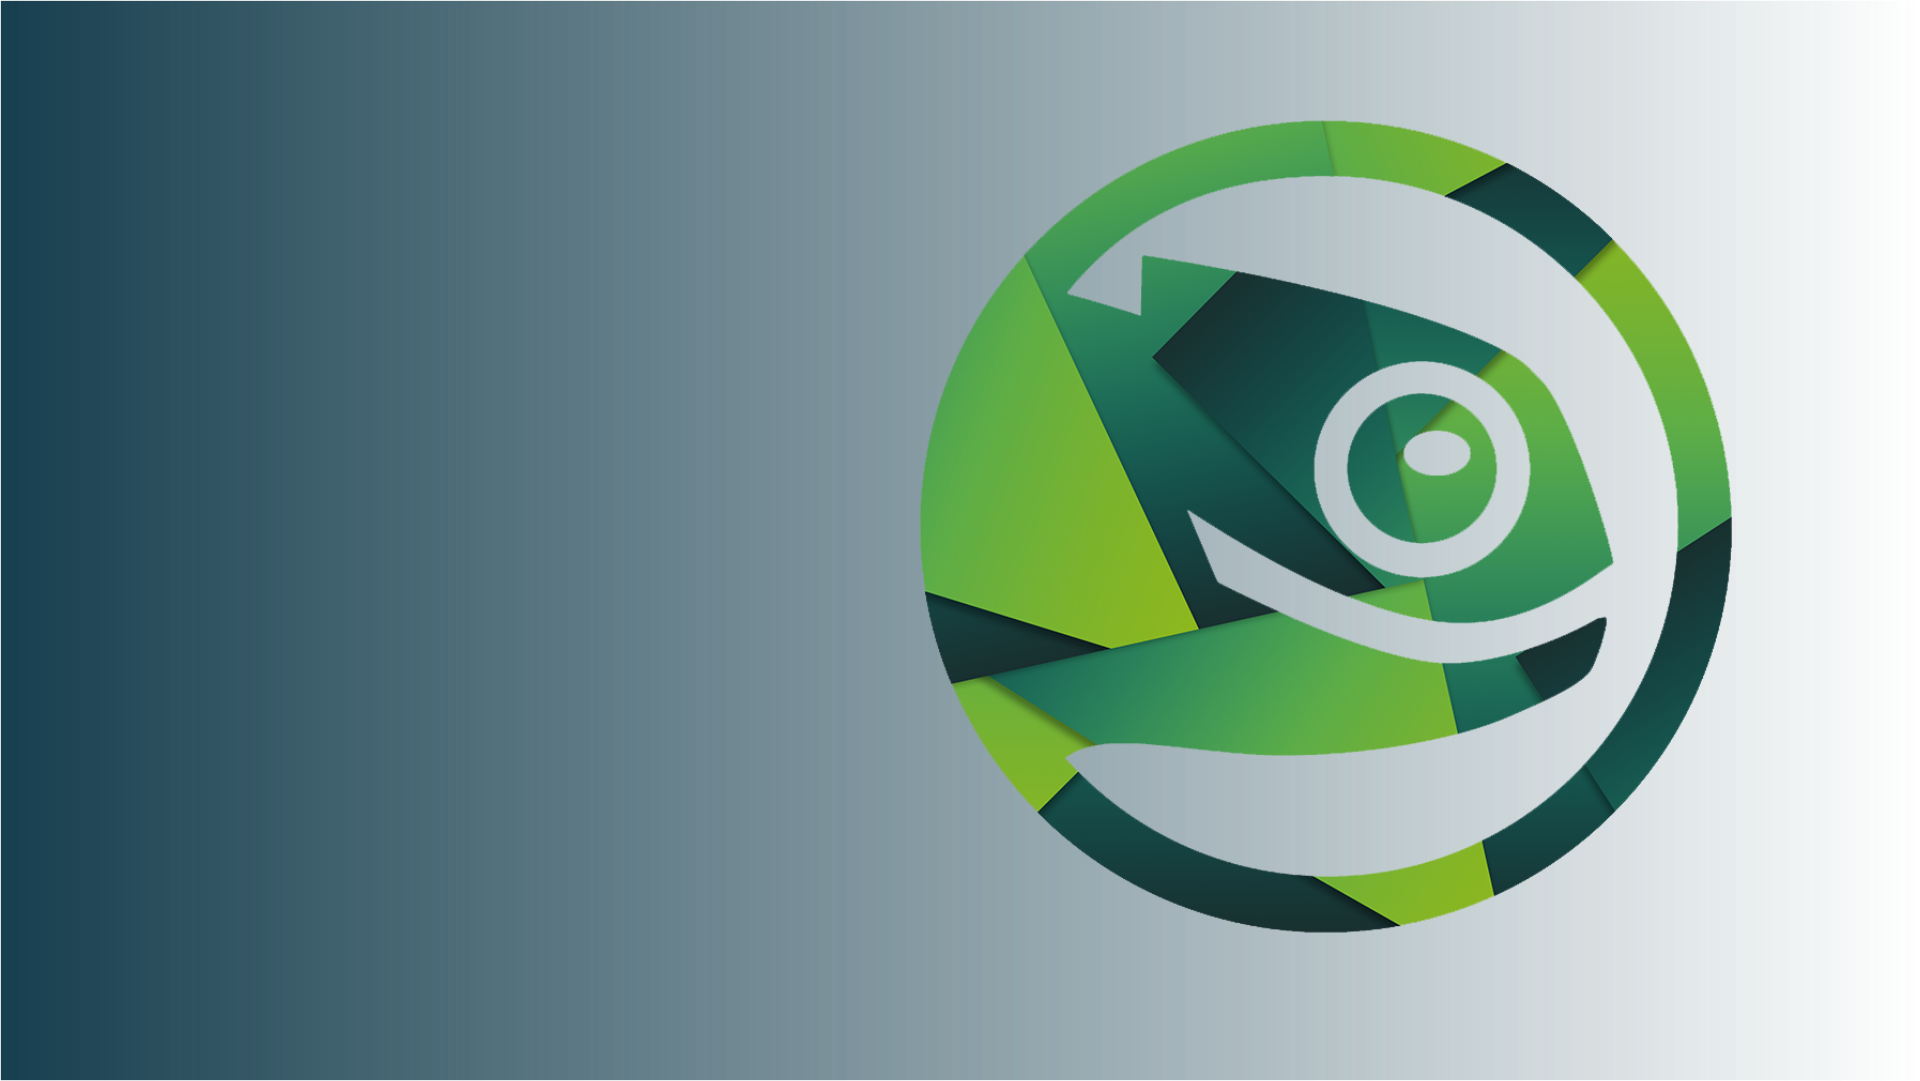 Introducing the openSUSE 2020 End of Year Survey